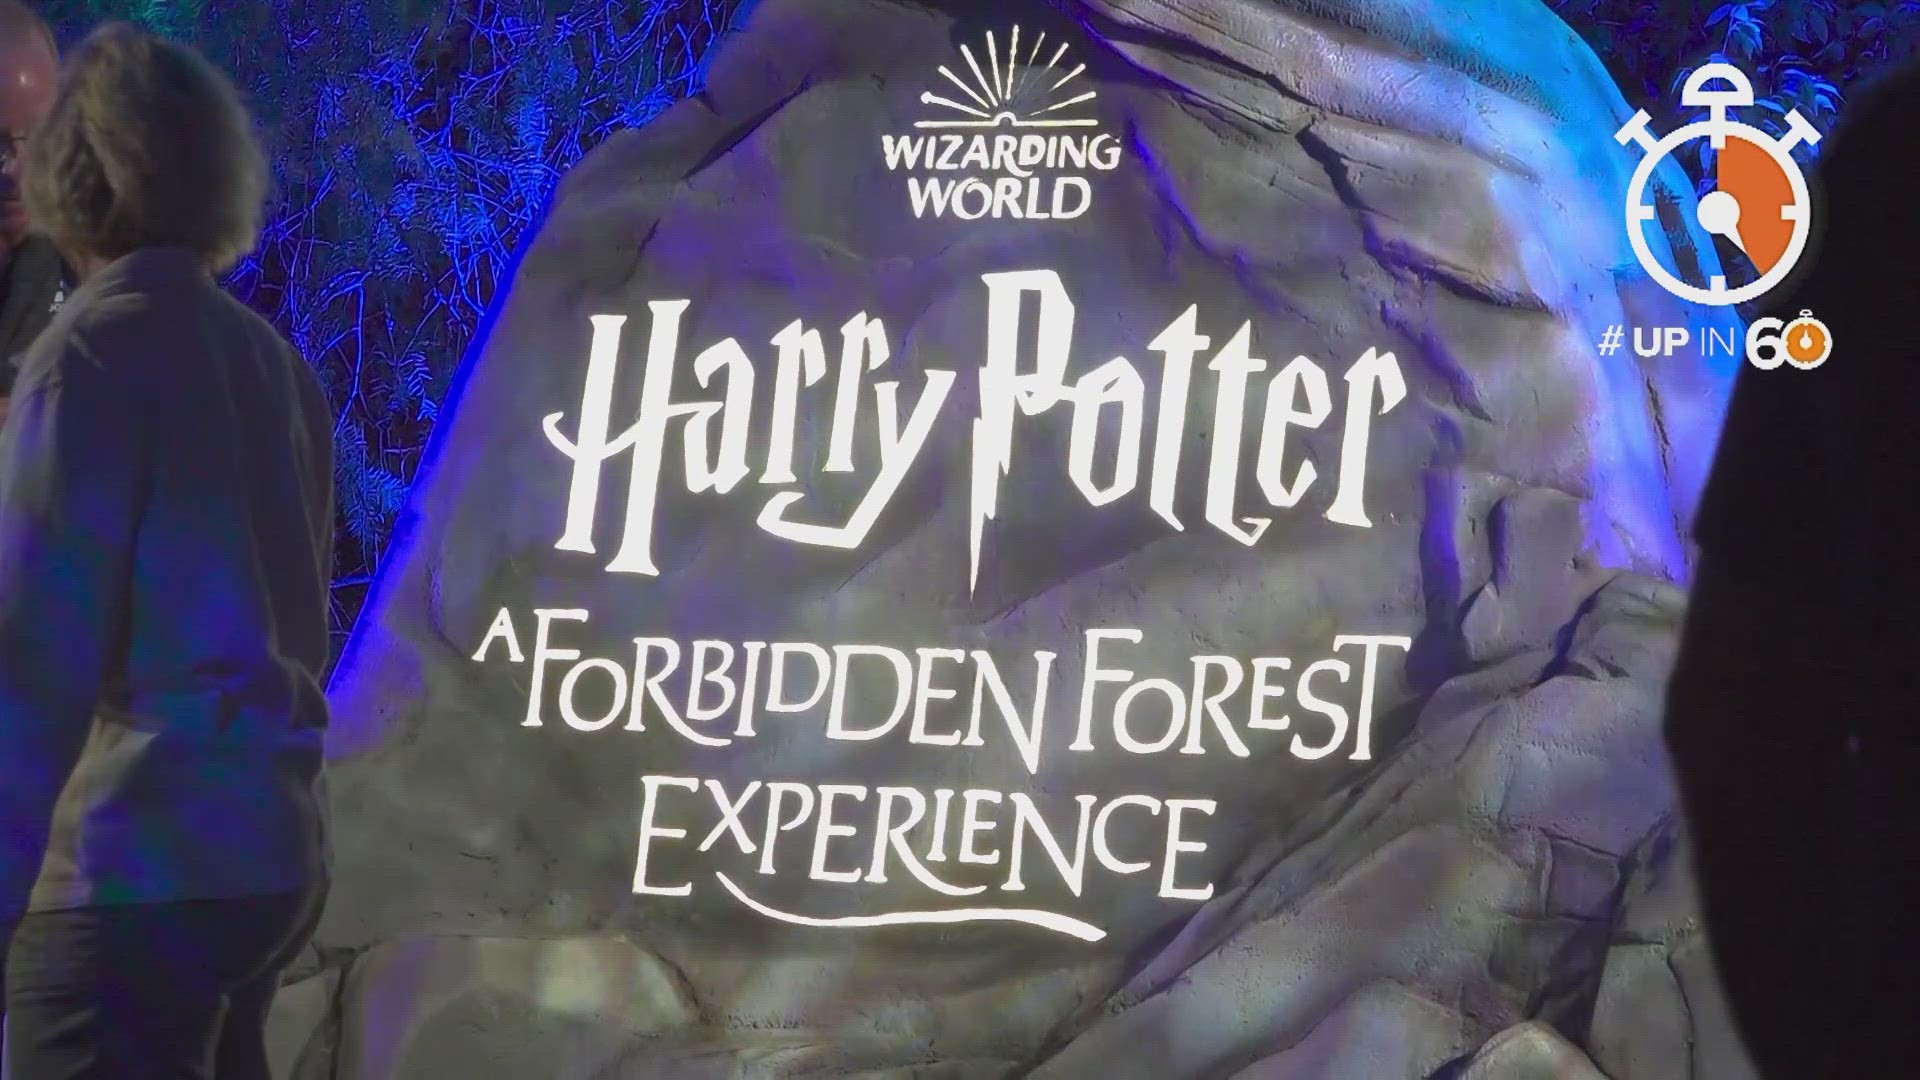 The Harry Potter Forbidden Forest Experience is open now through January in Little Elm Park.